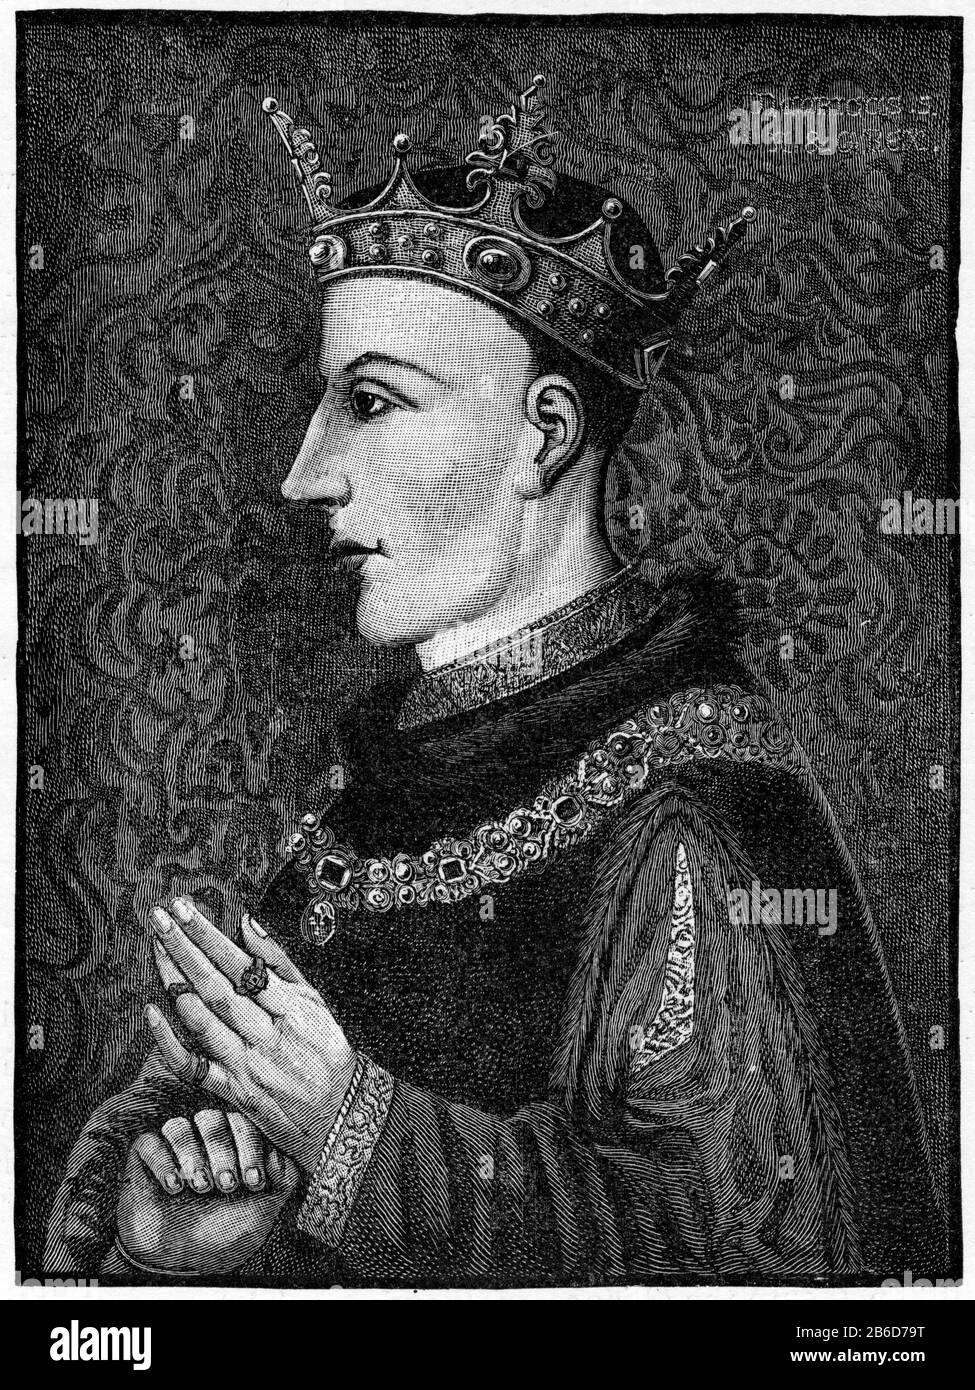 King Henry V (1386-1422). Henry V (1386-1422: Henry of Monmouth), King of England from 1413 until his death in 1422. Stock Photo